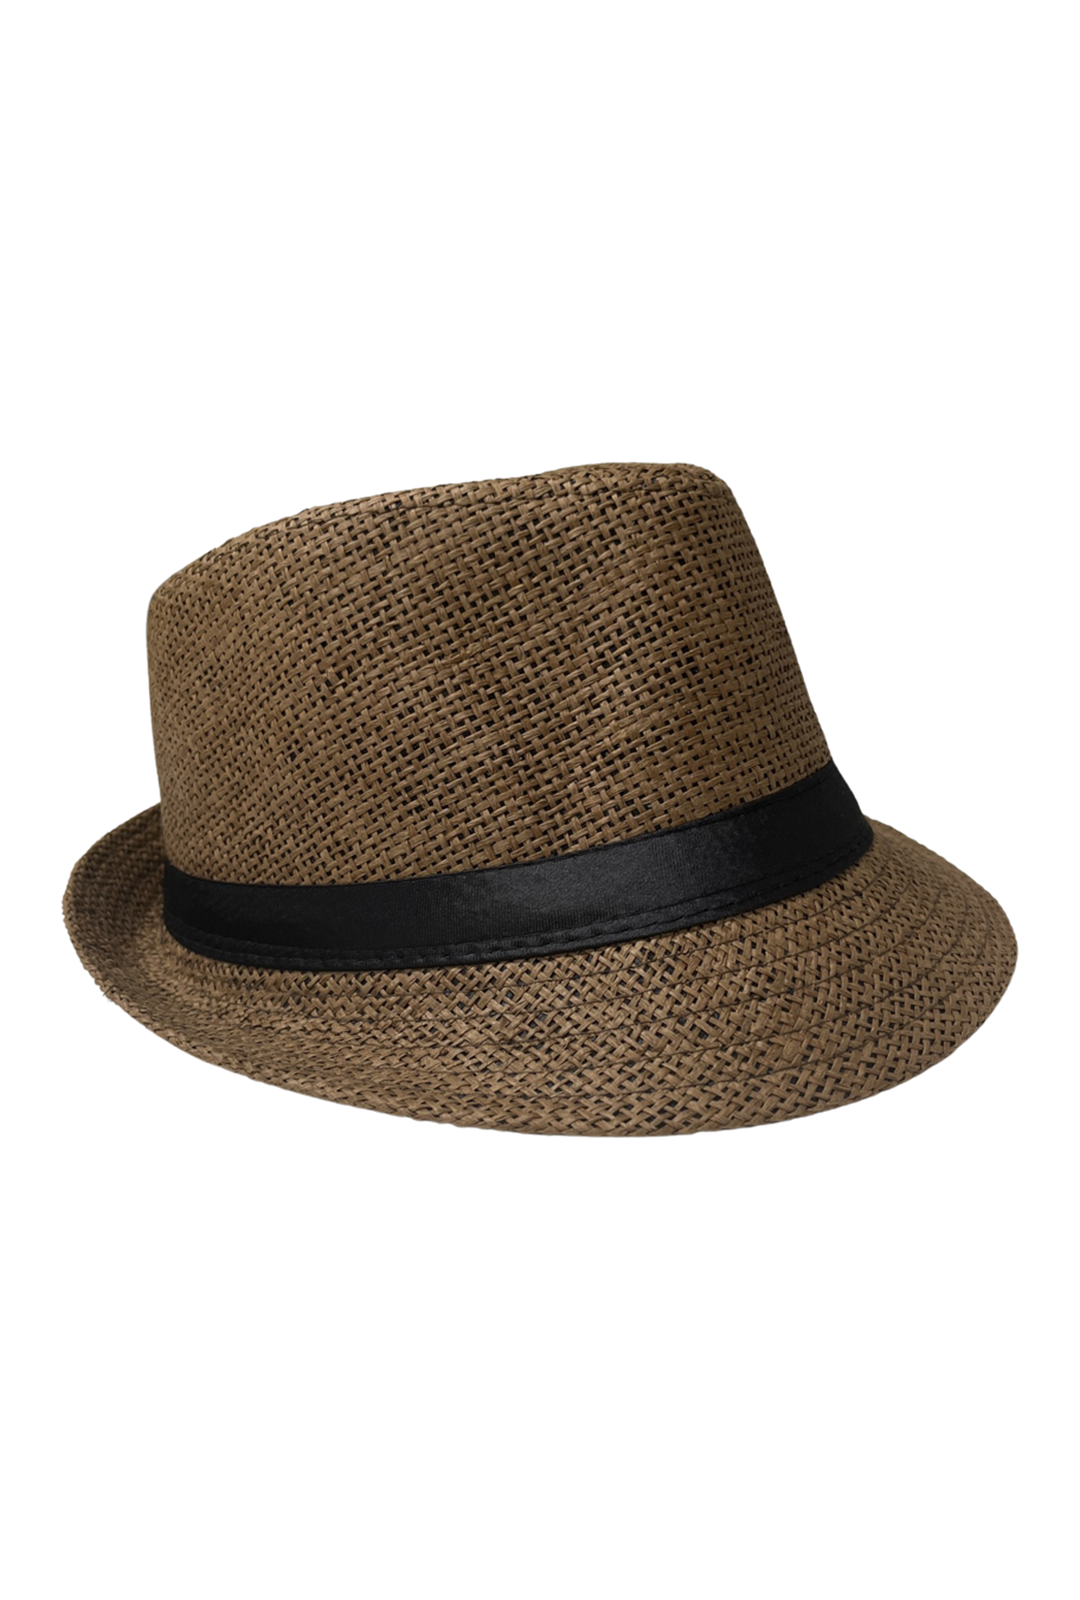 Tan Trilby Hat With Black Band